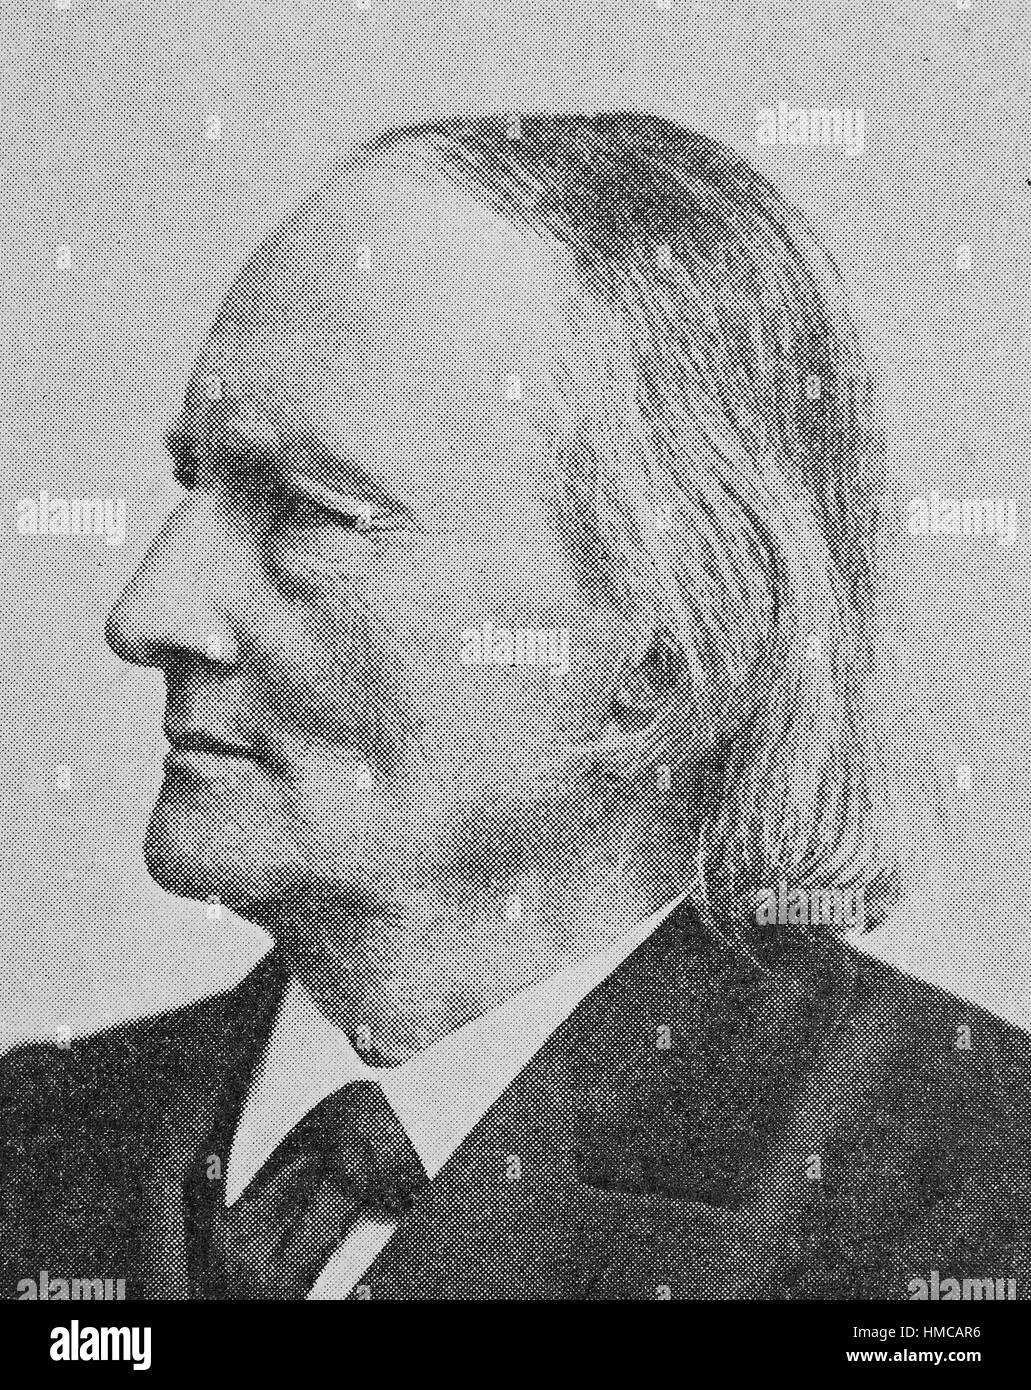 Karl Gotthelf Jakob Weinhold, 26 October 1823, in Reichenbach - 15 August 1901, in Bad Nauheim, was a German folklorist and linguist who specialized in German studies, photo or illustration, published 1892, digital improved Stock Photo